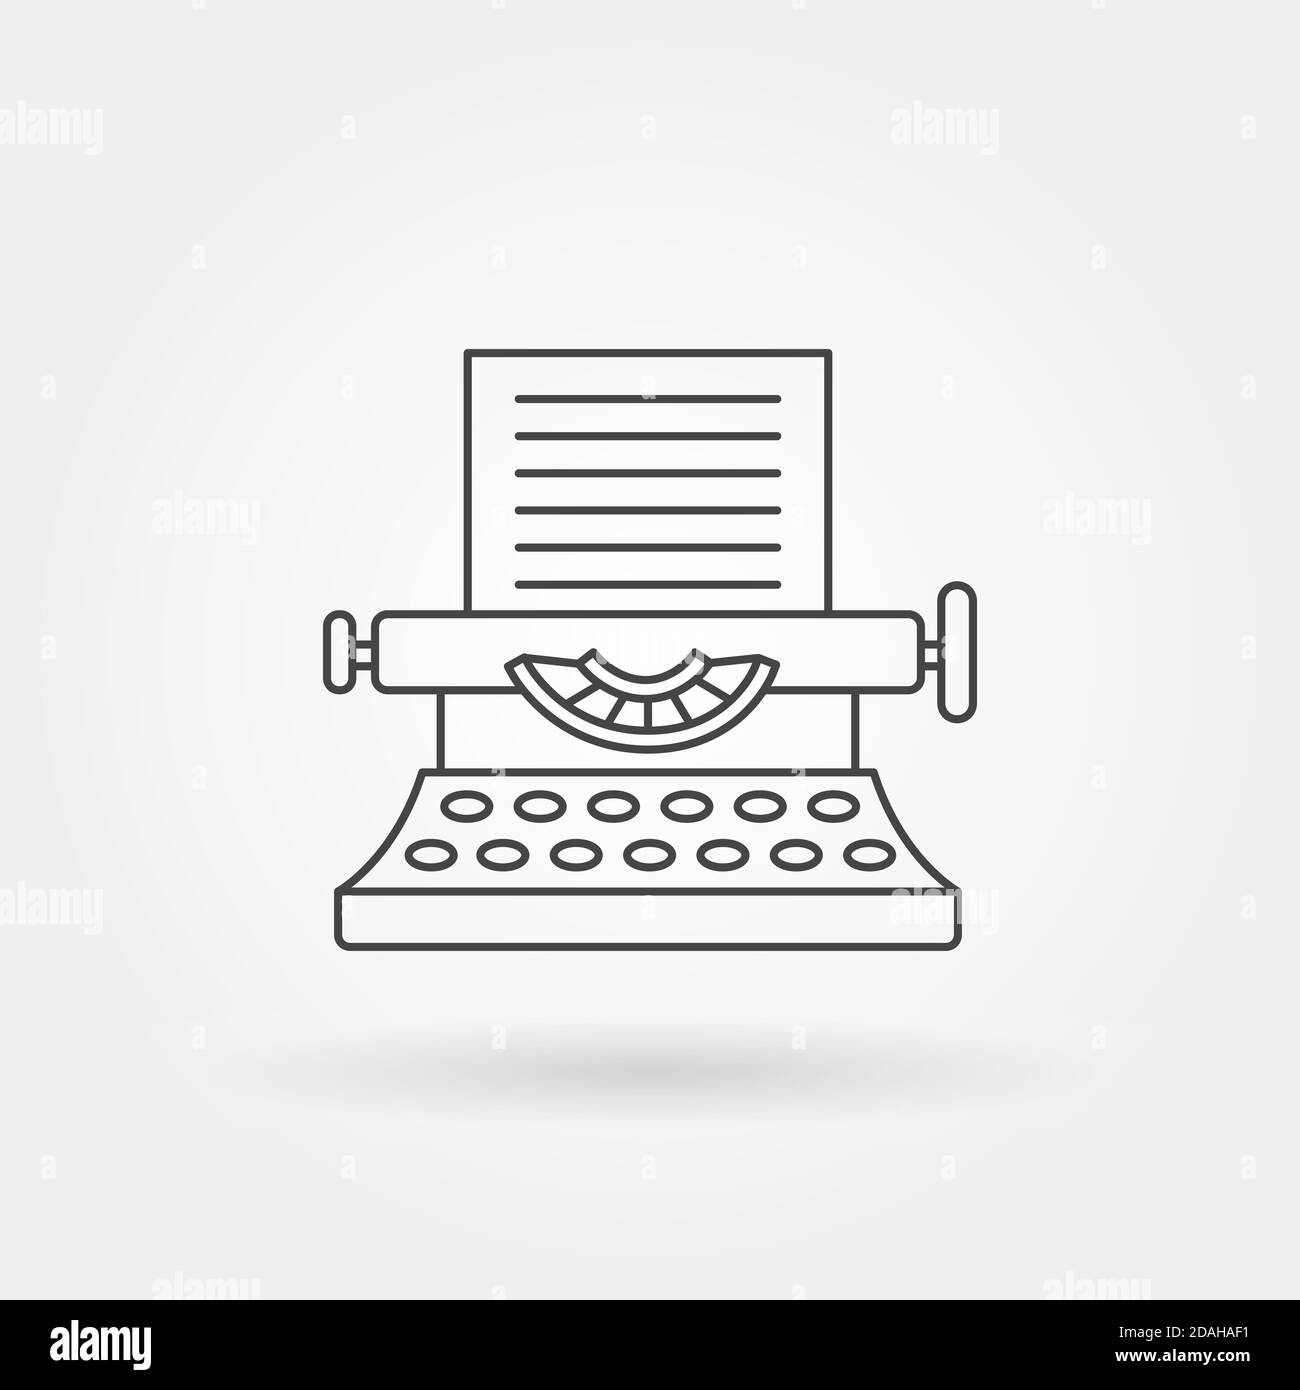 Typing machine icon single isolated with modern line or outline style Stock Vector